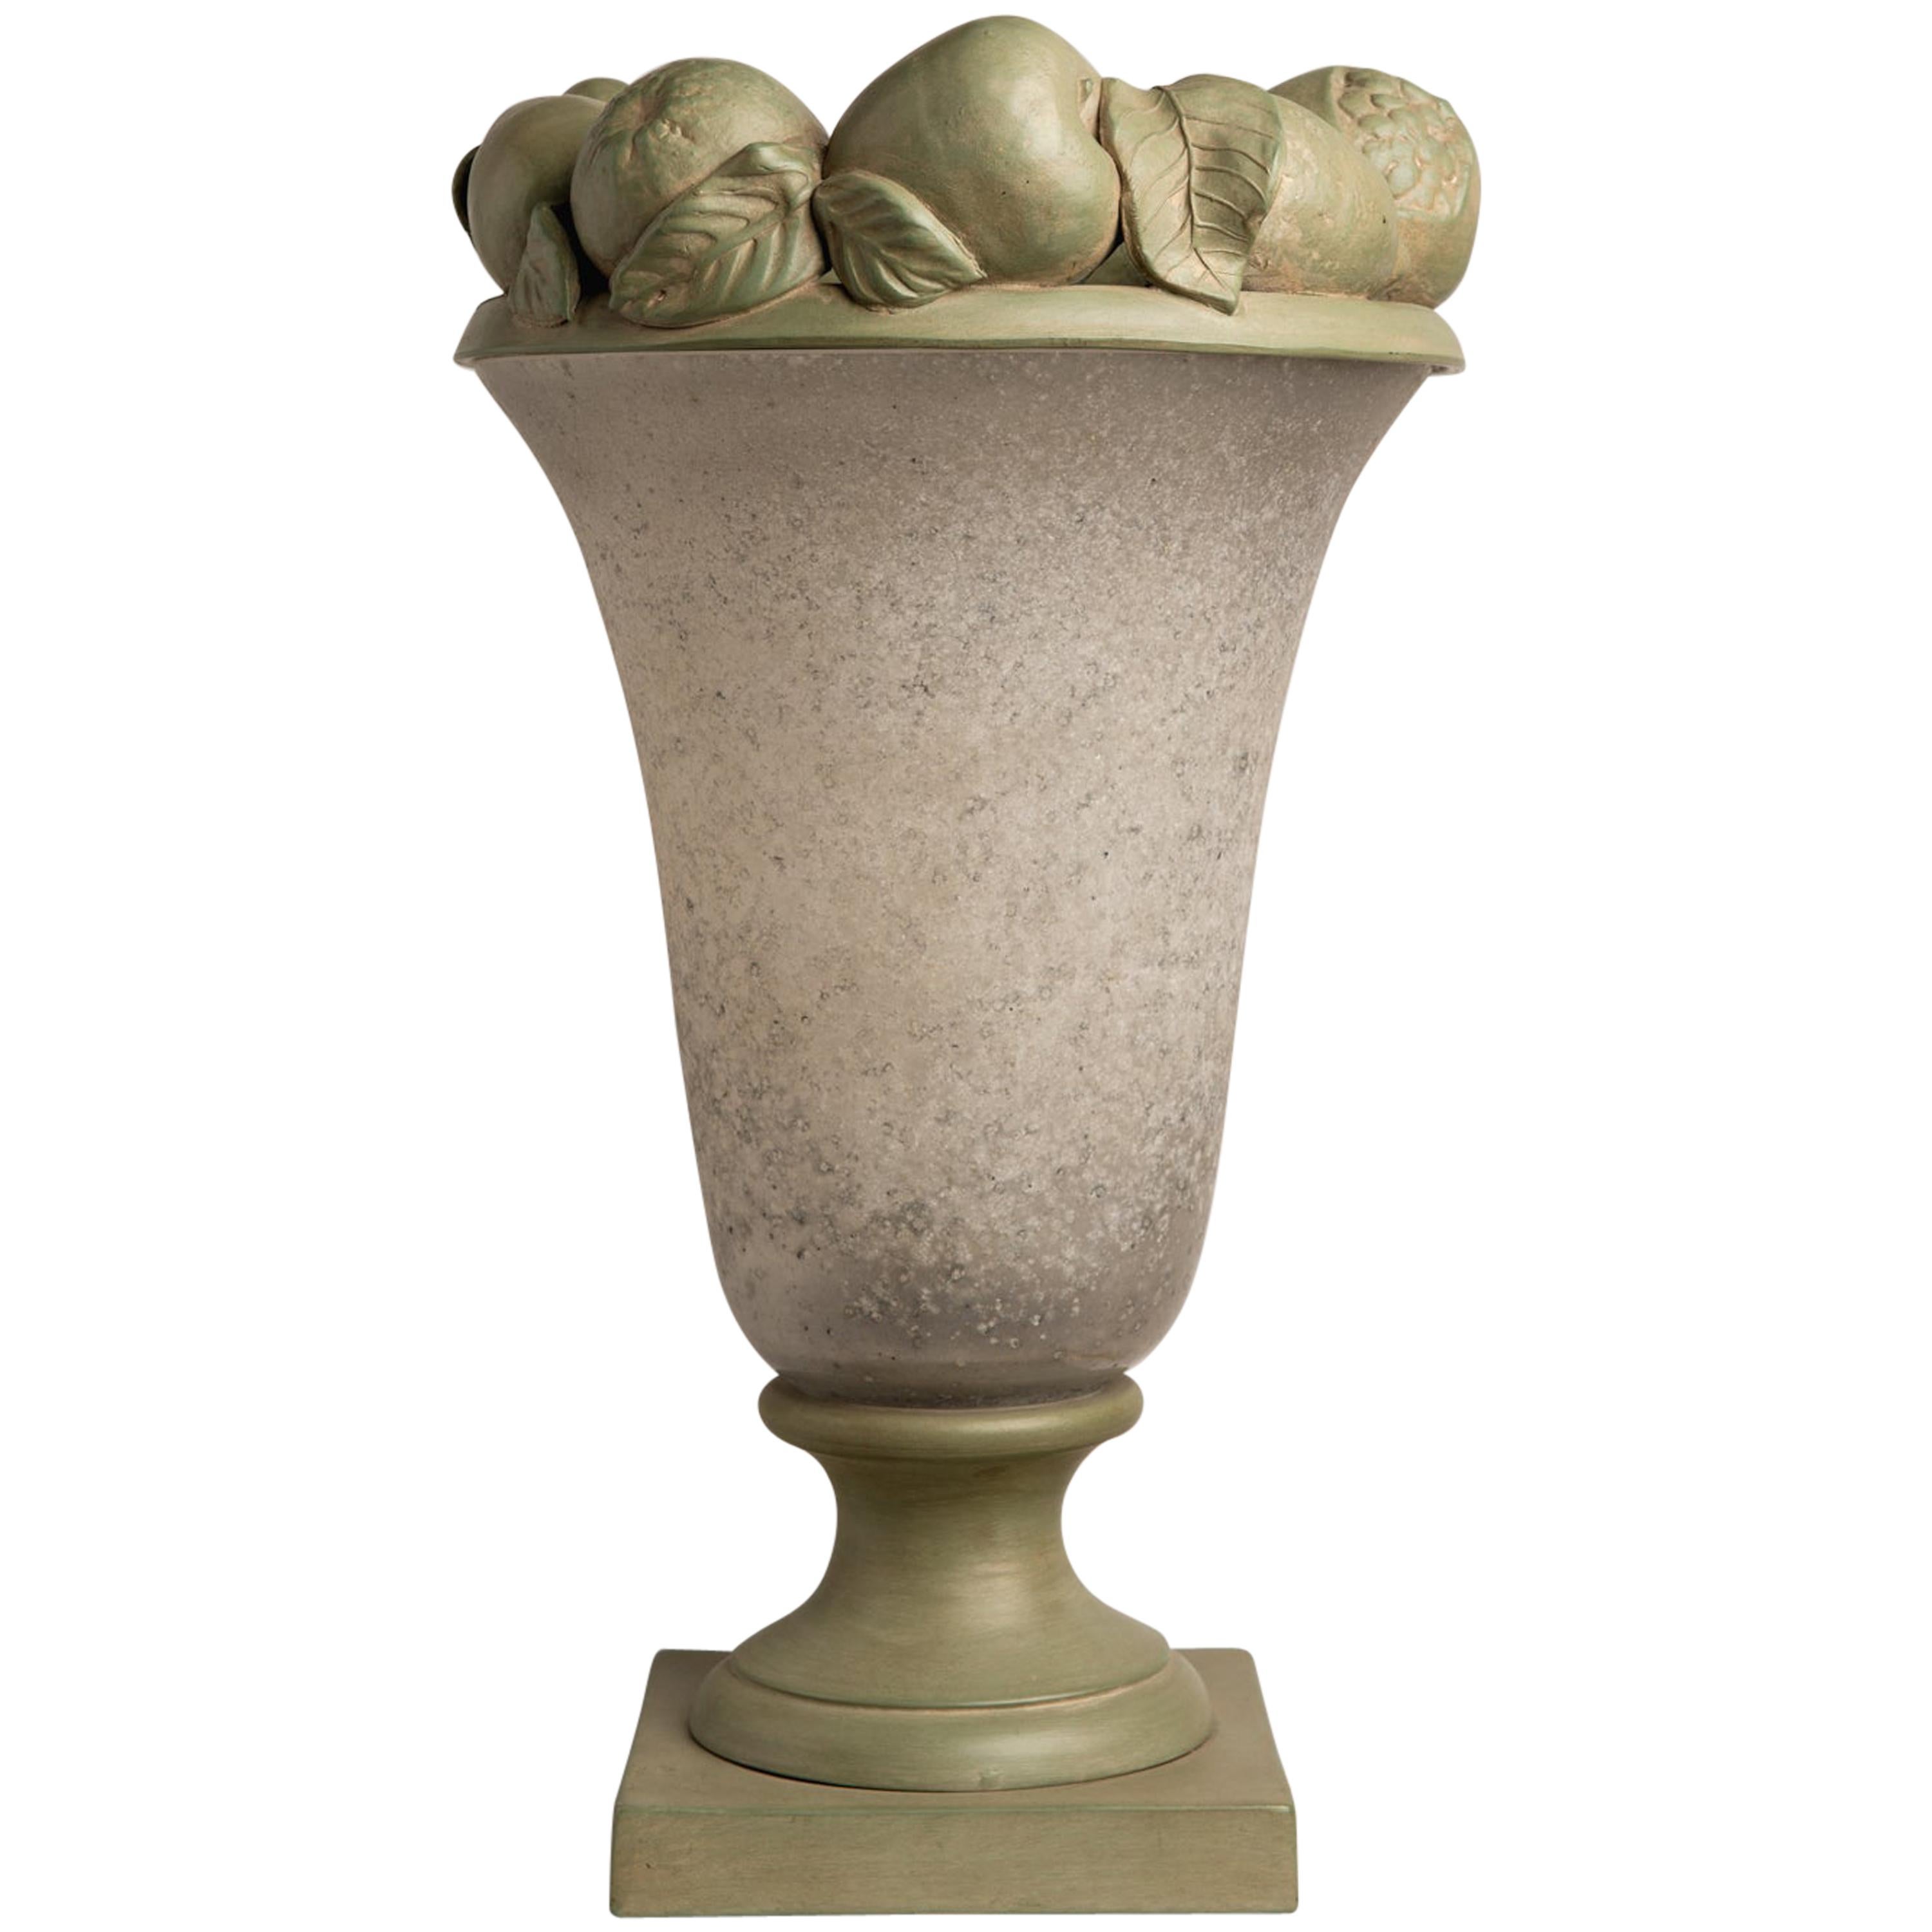 Italian Table Lamp with Fruits Carved in Terracotta